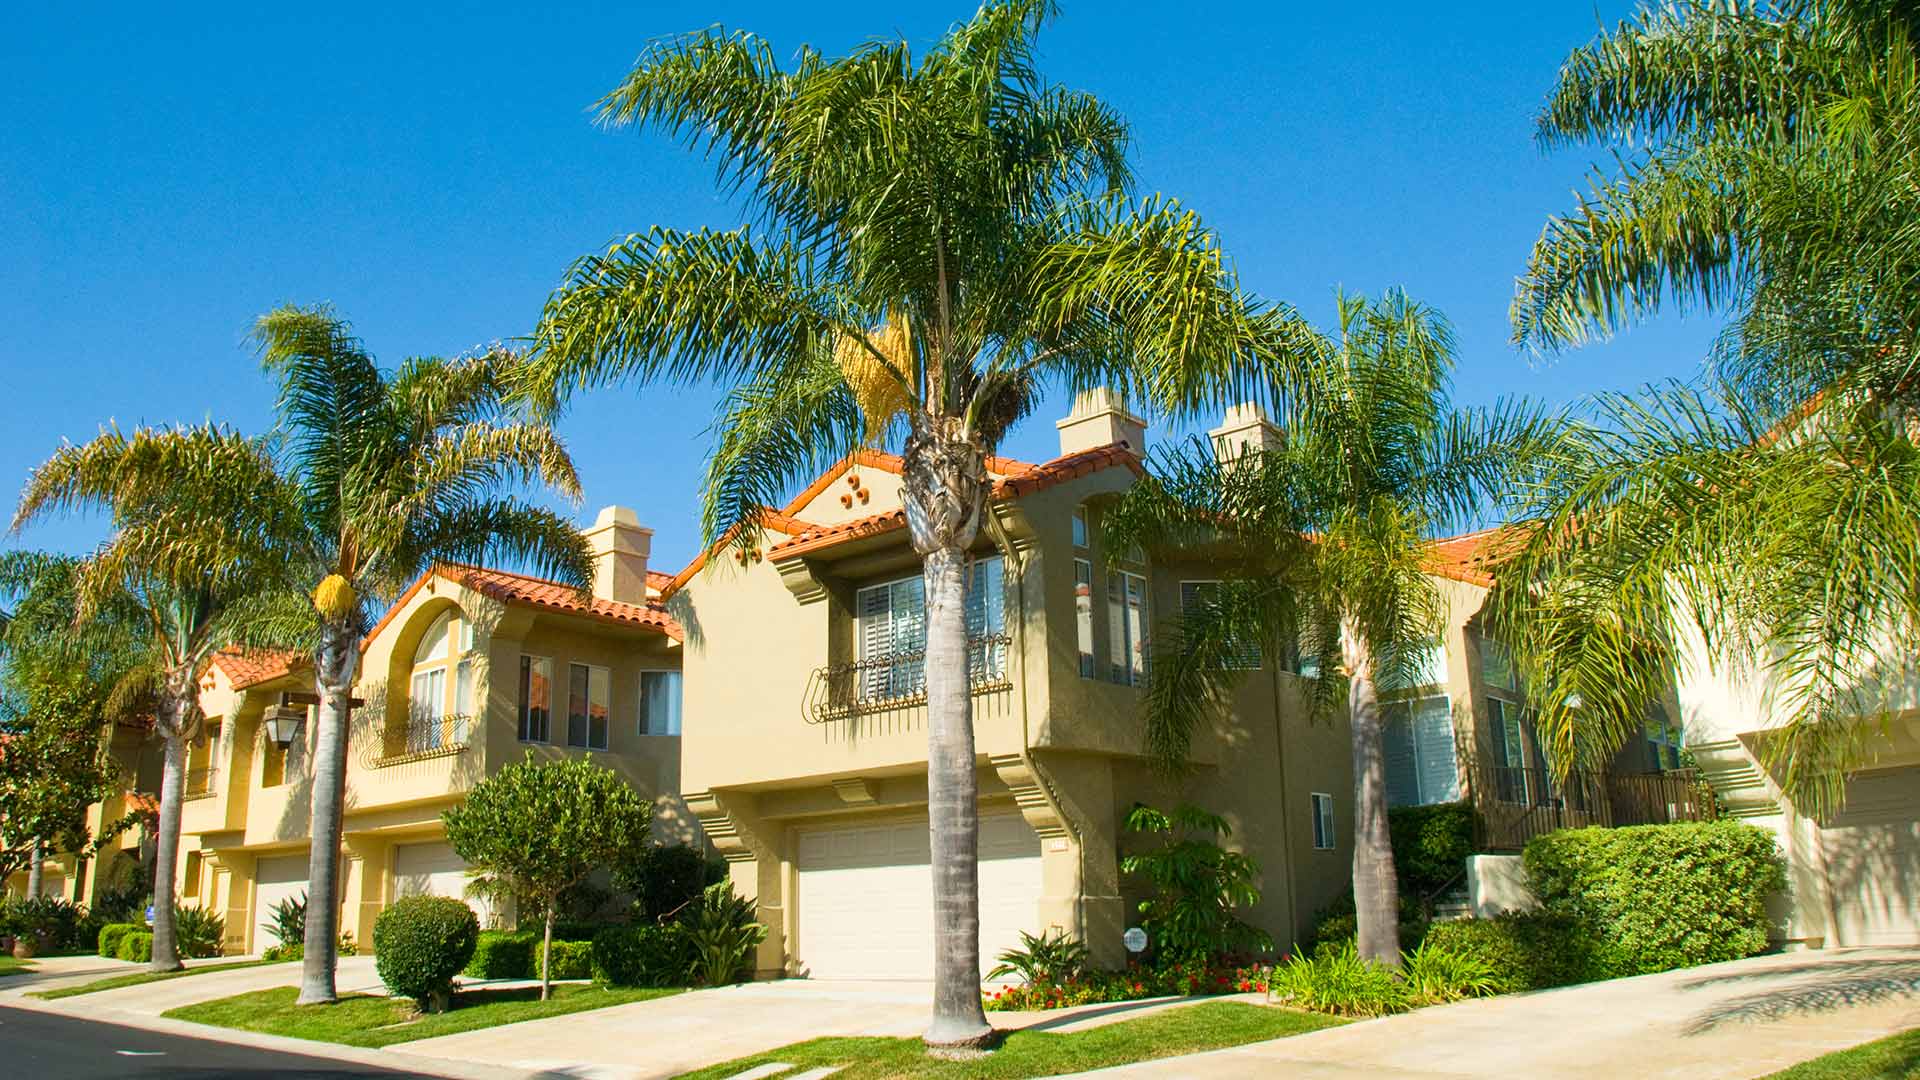 Residential homes in the Lady Lake, FL area with beautiful lawns, landscapes, and palm trees.